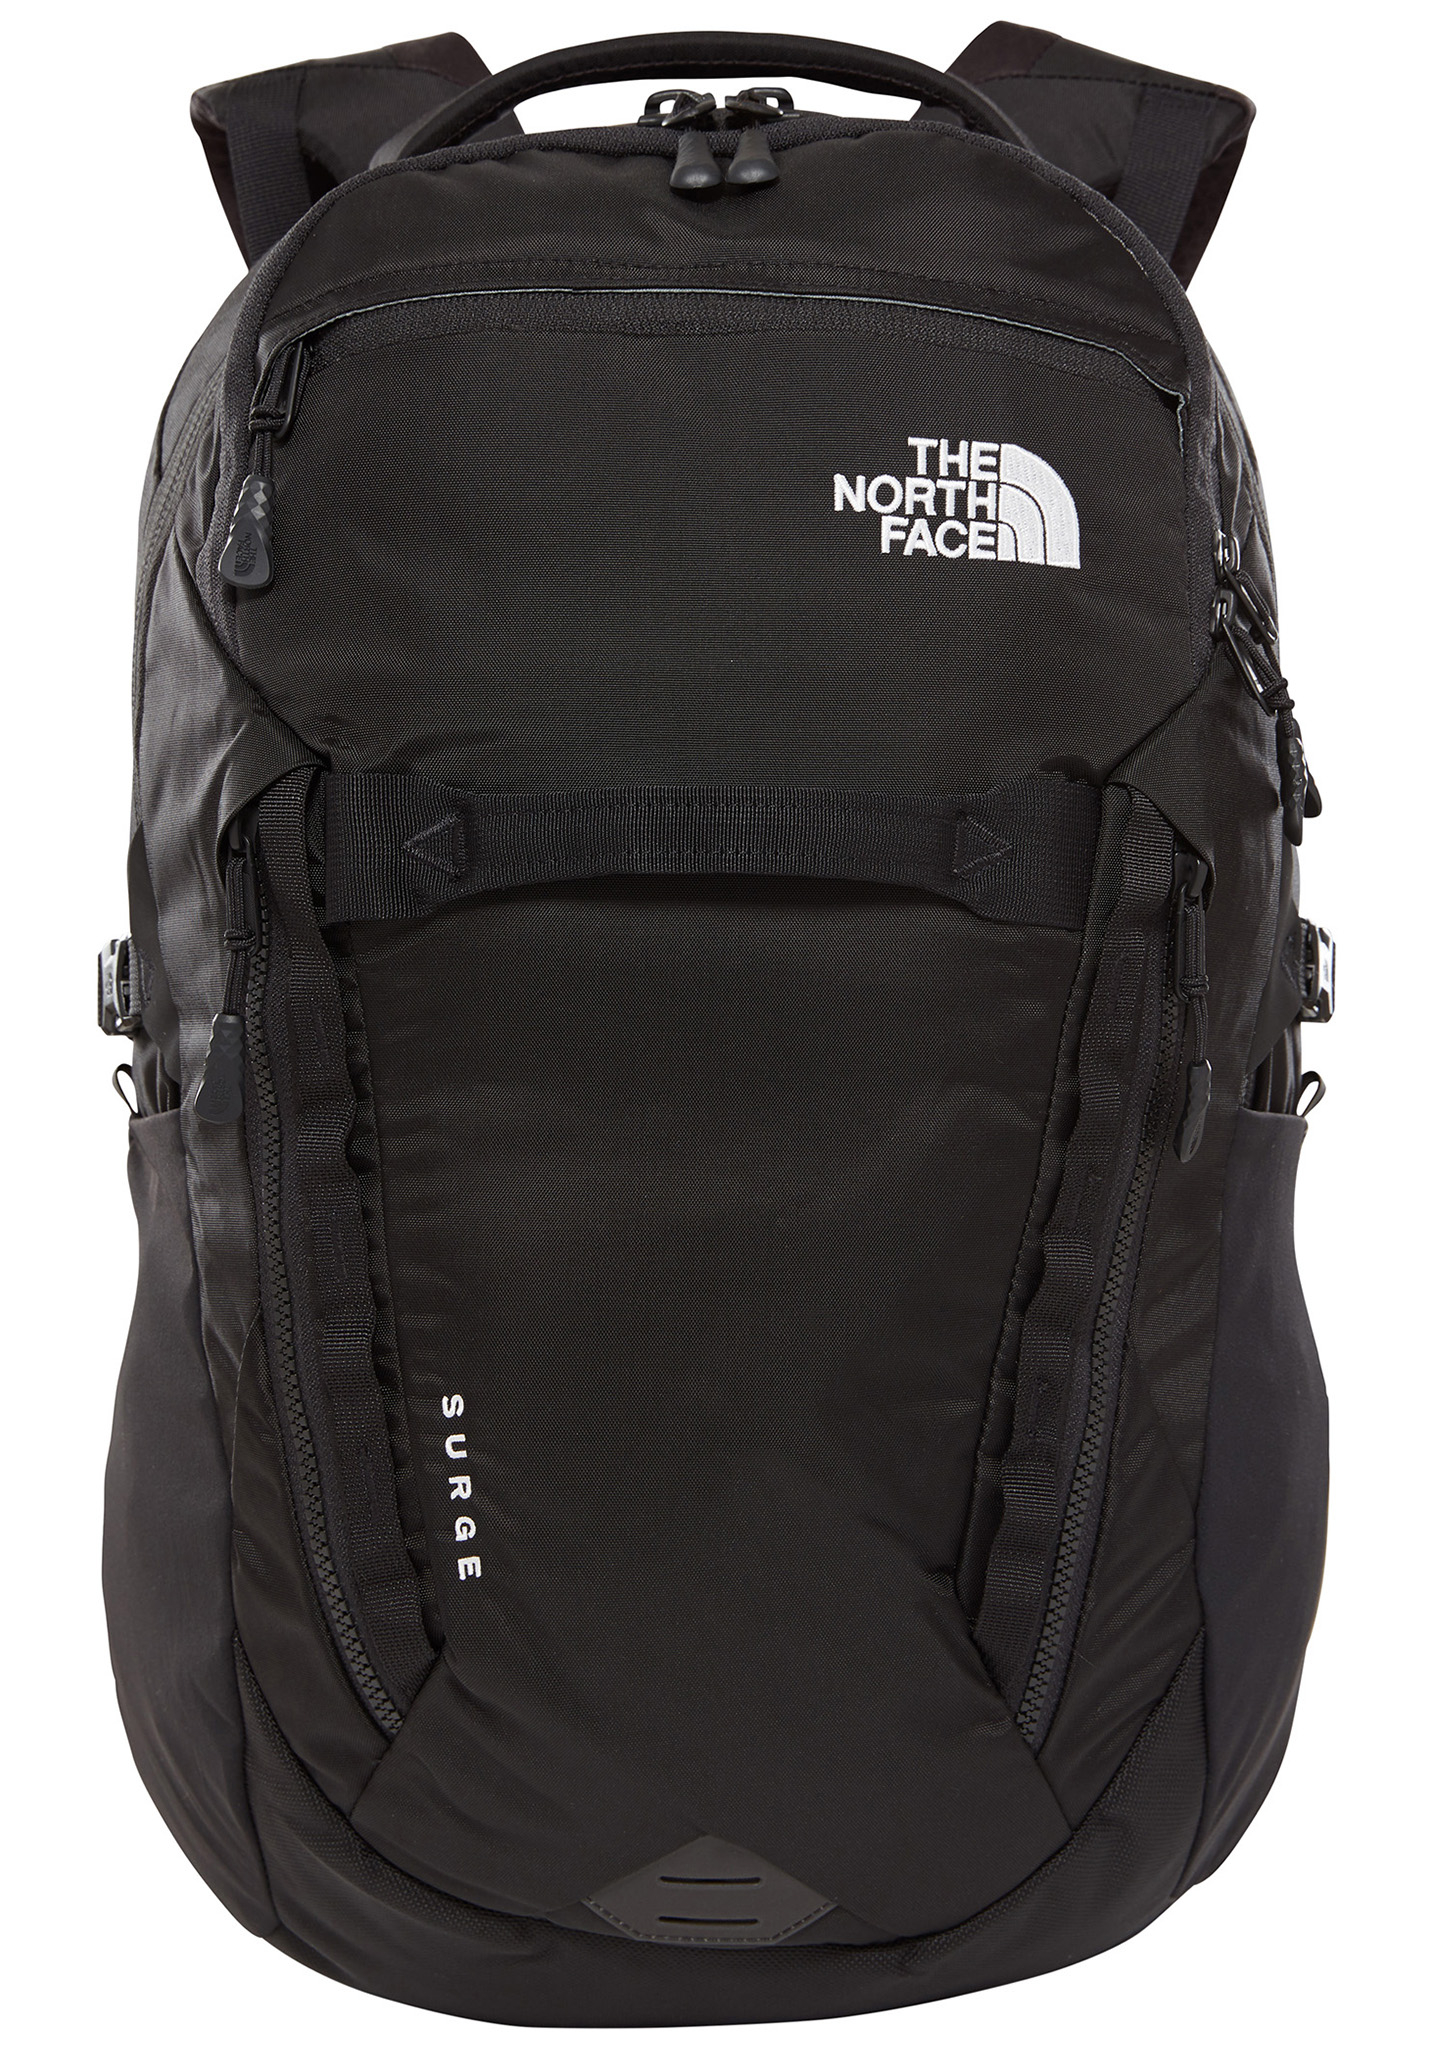 The North Face Surge Rucksack tnf schwarz One Size